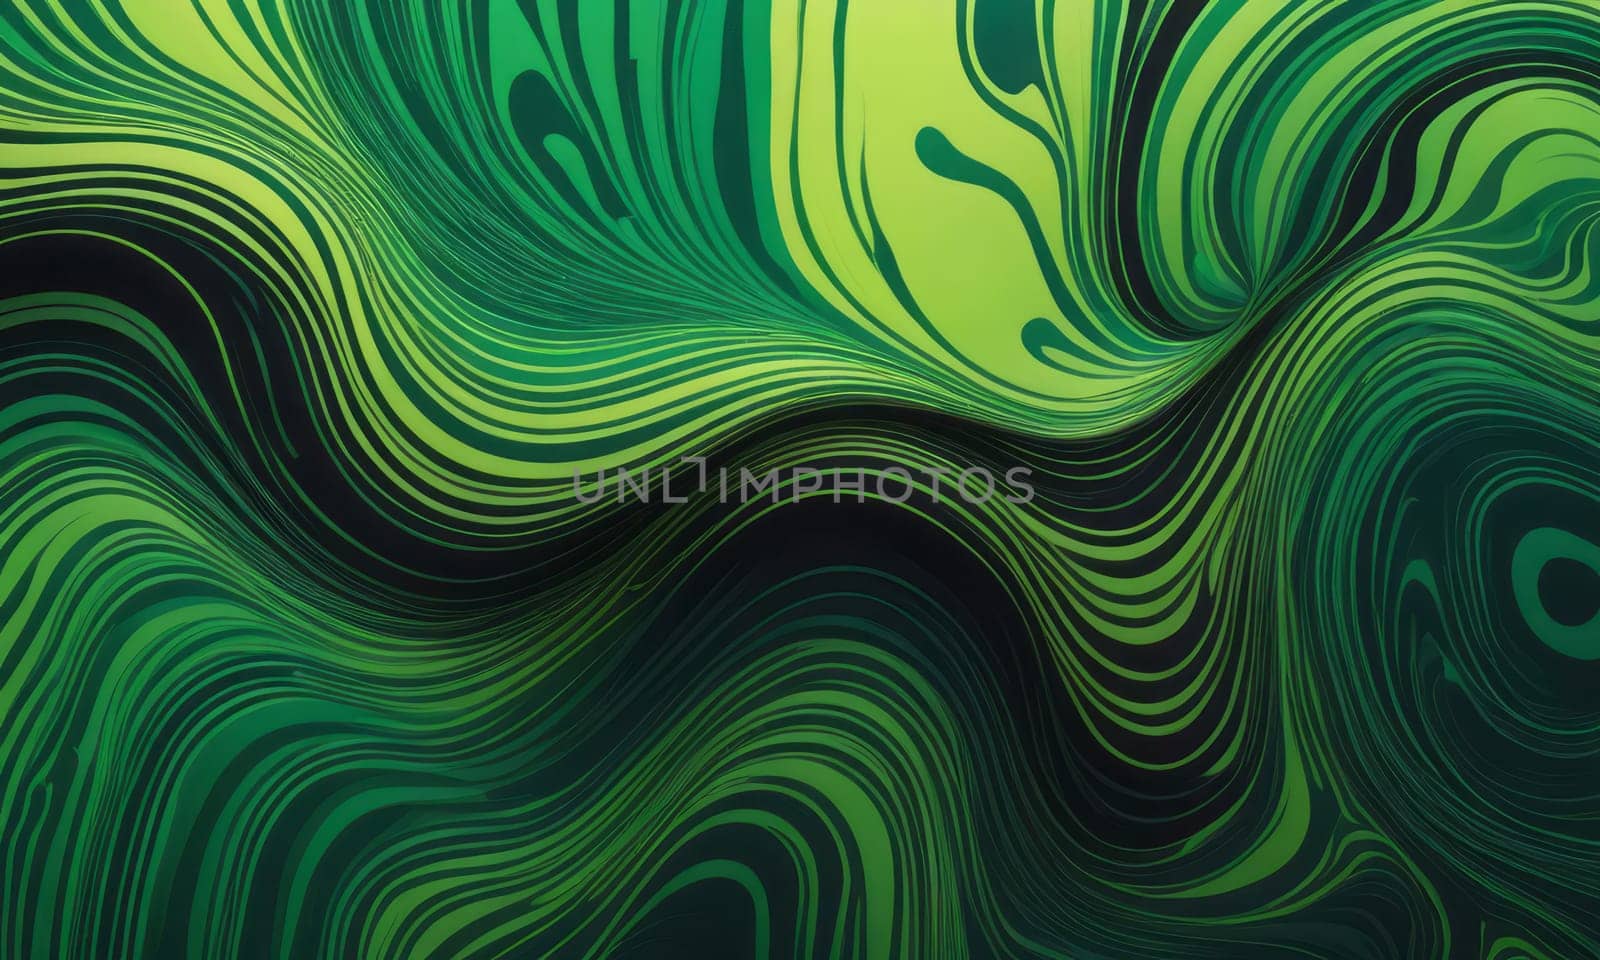 Marbled Shapes in Green Black by nkotlyar